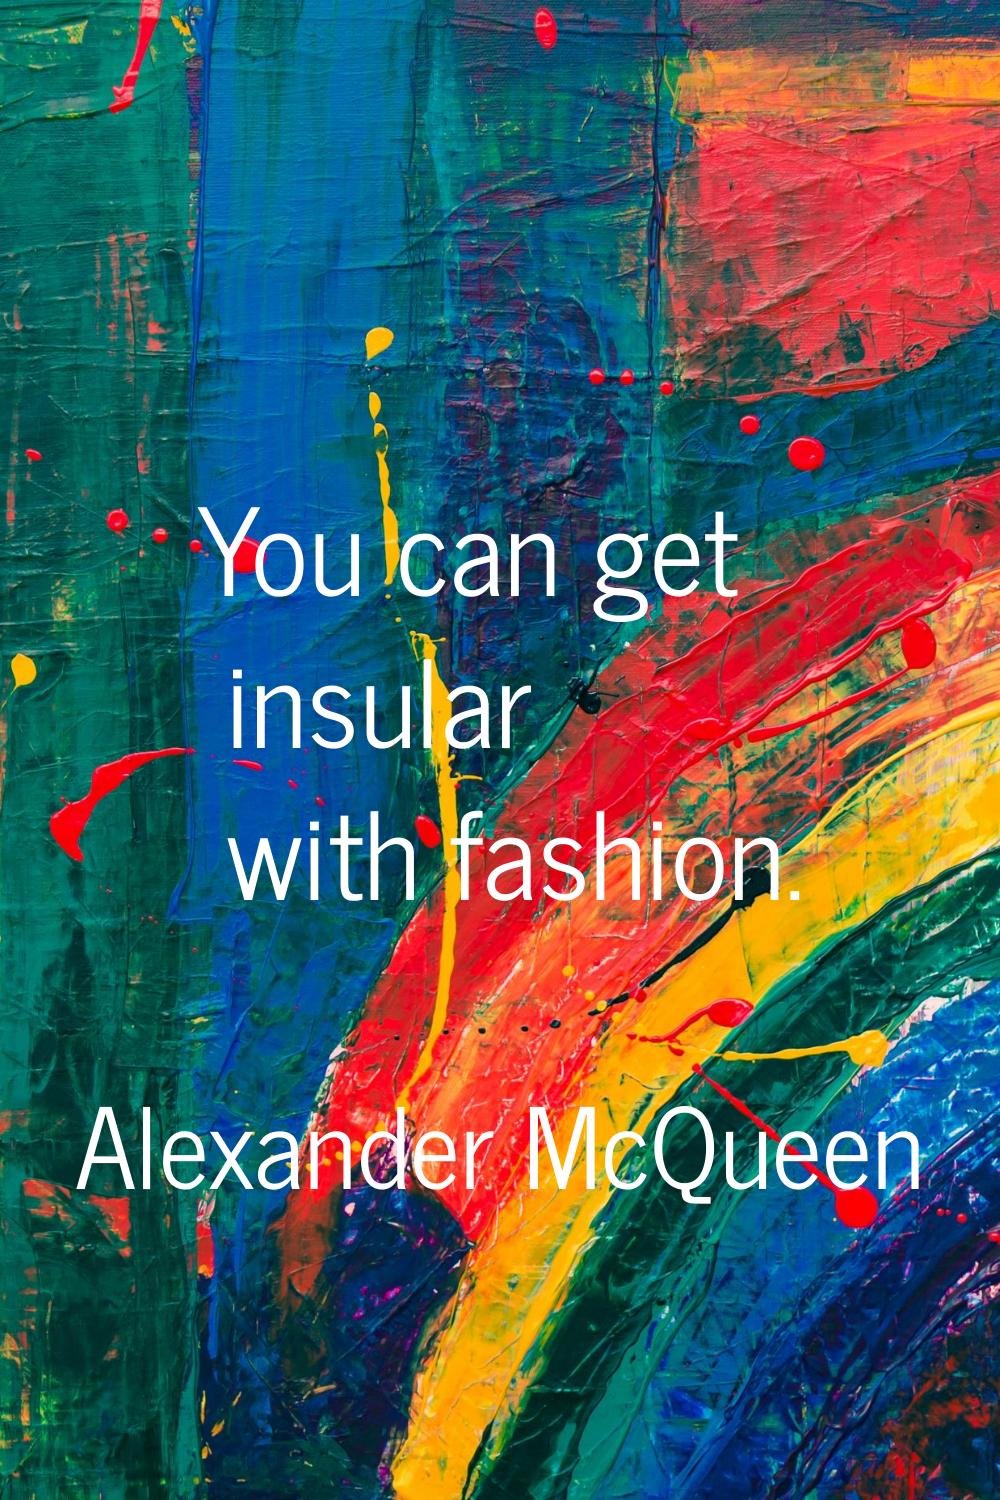 You can get insular with fashion.